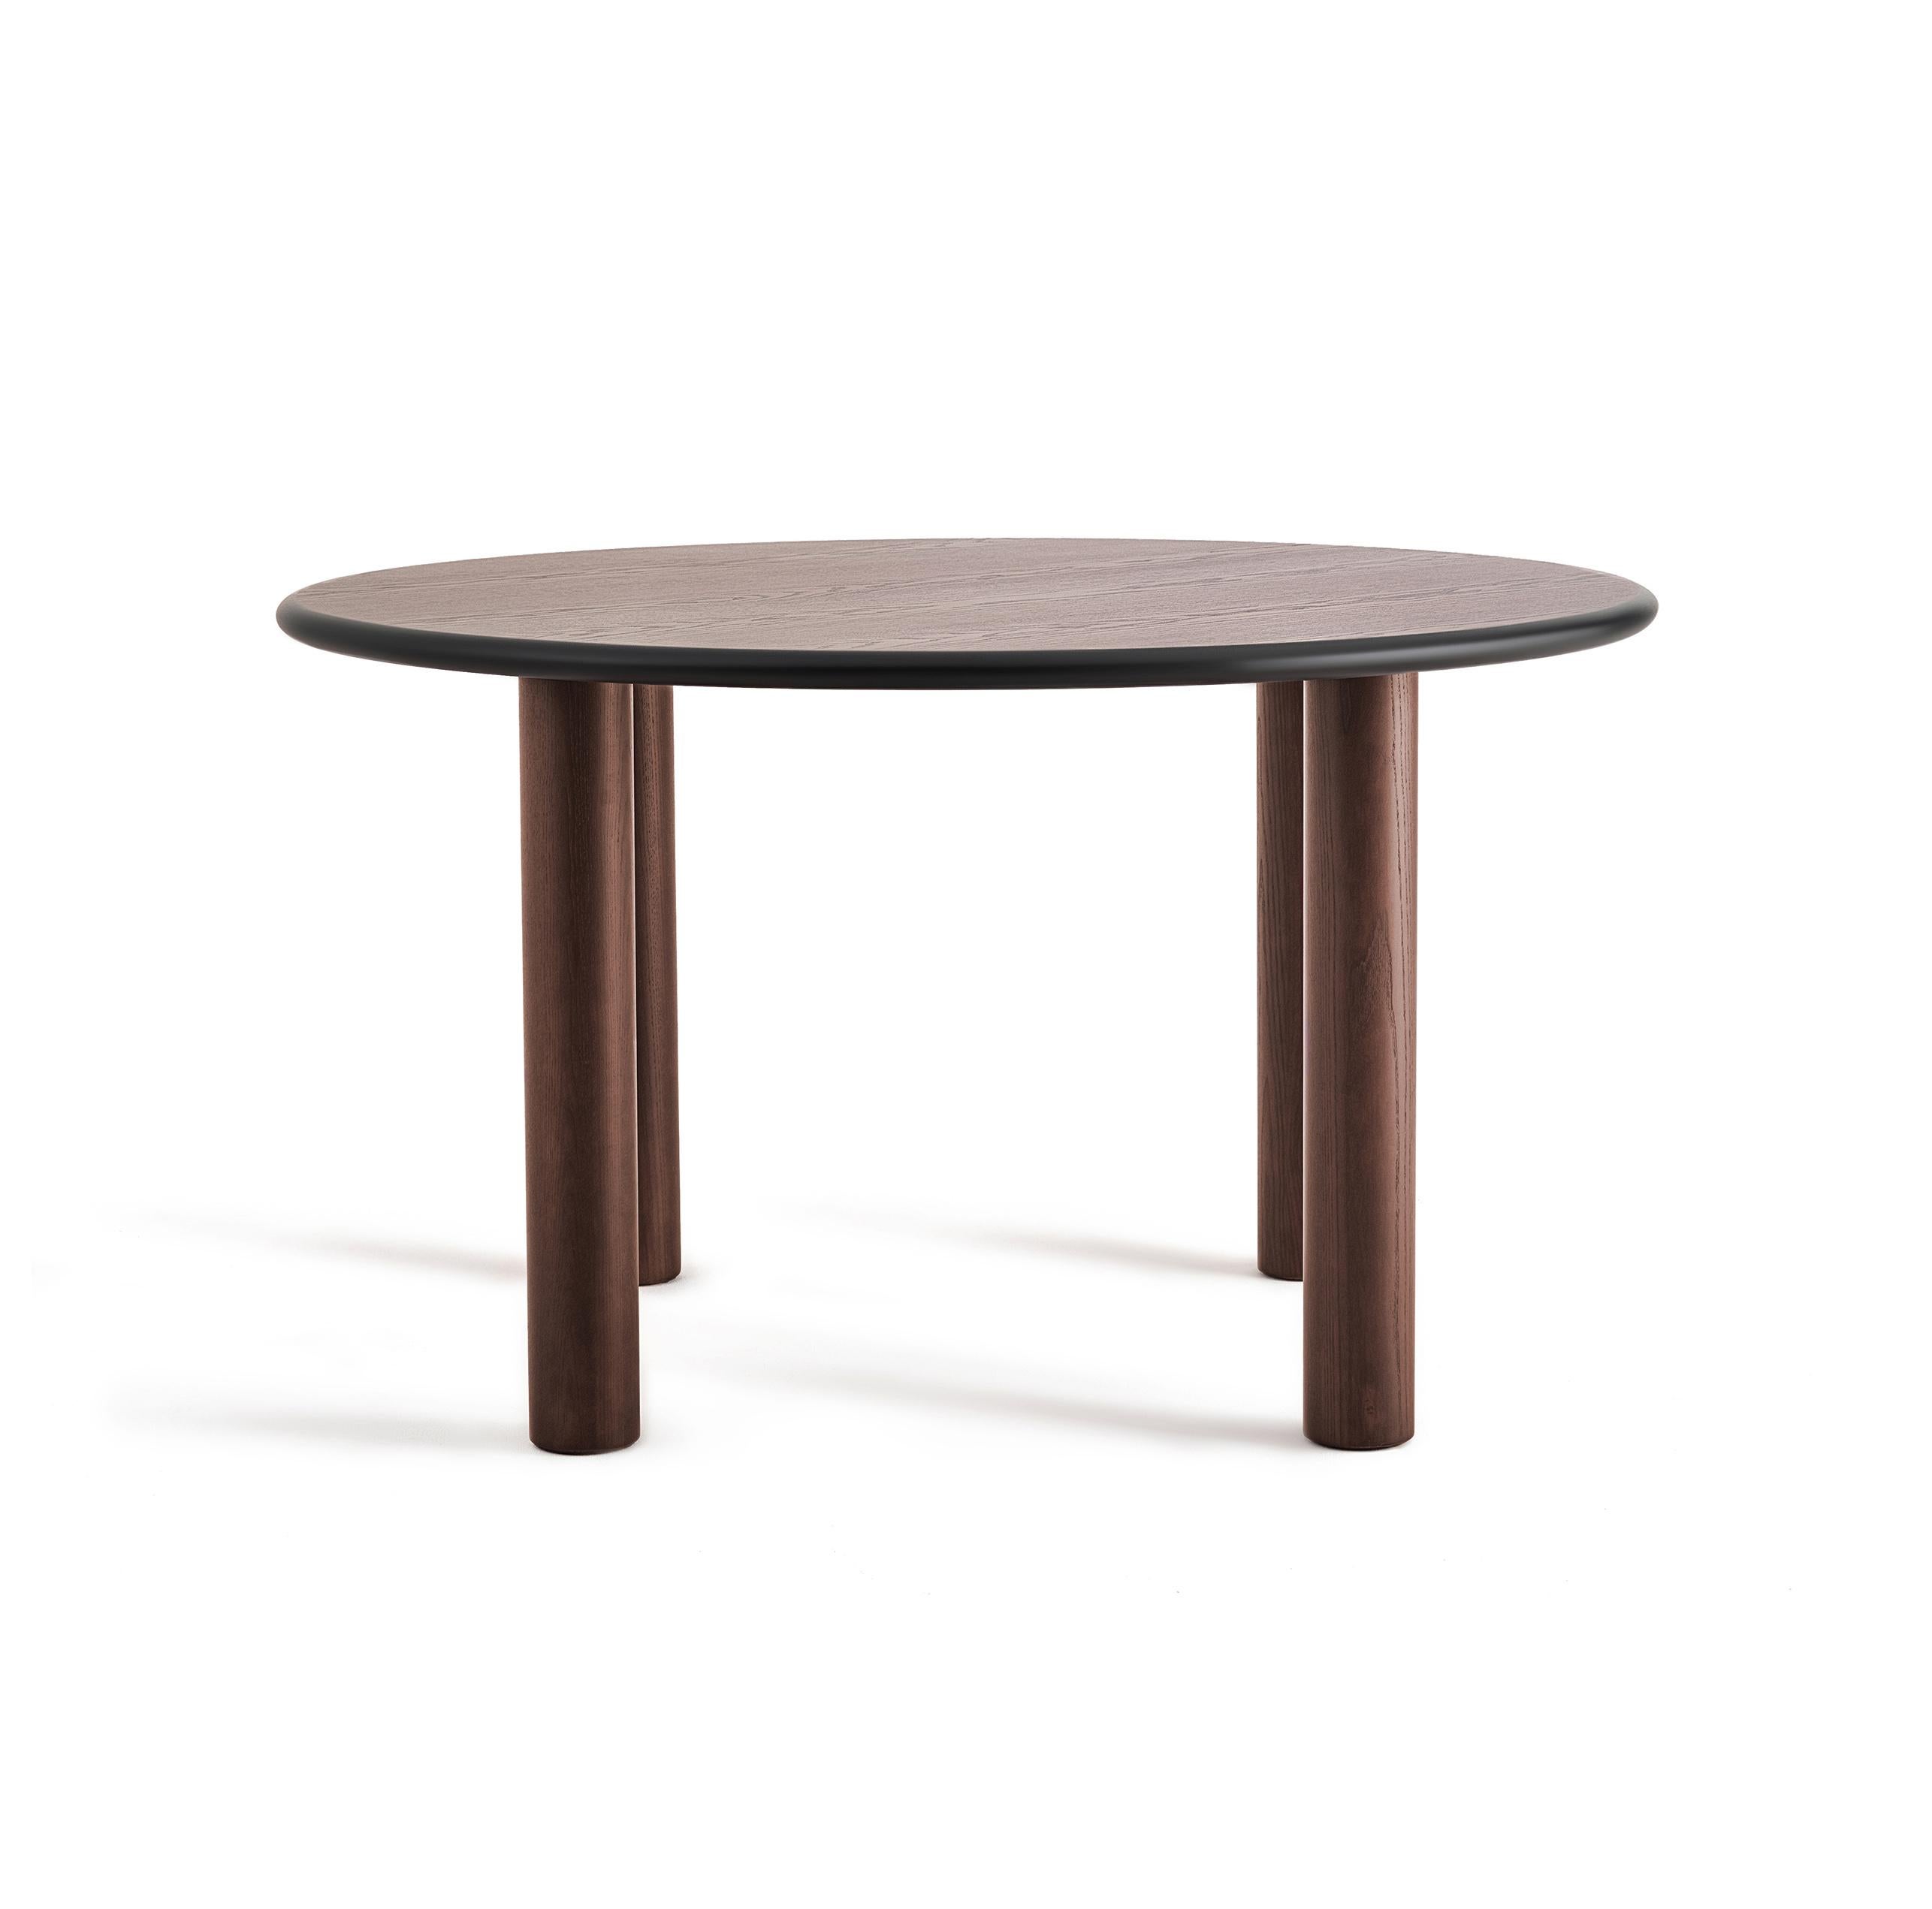 Veneer Contemporary Dining Round Table 'Paul' by Noom, Brown Stained, 180 cm For Sale